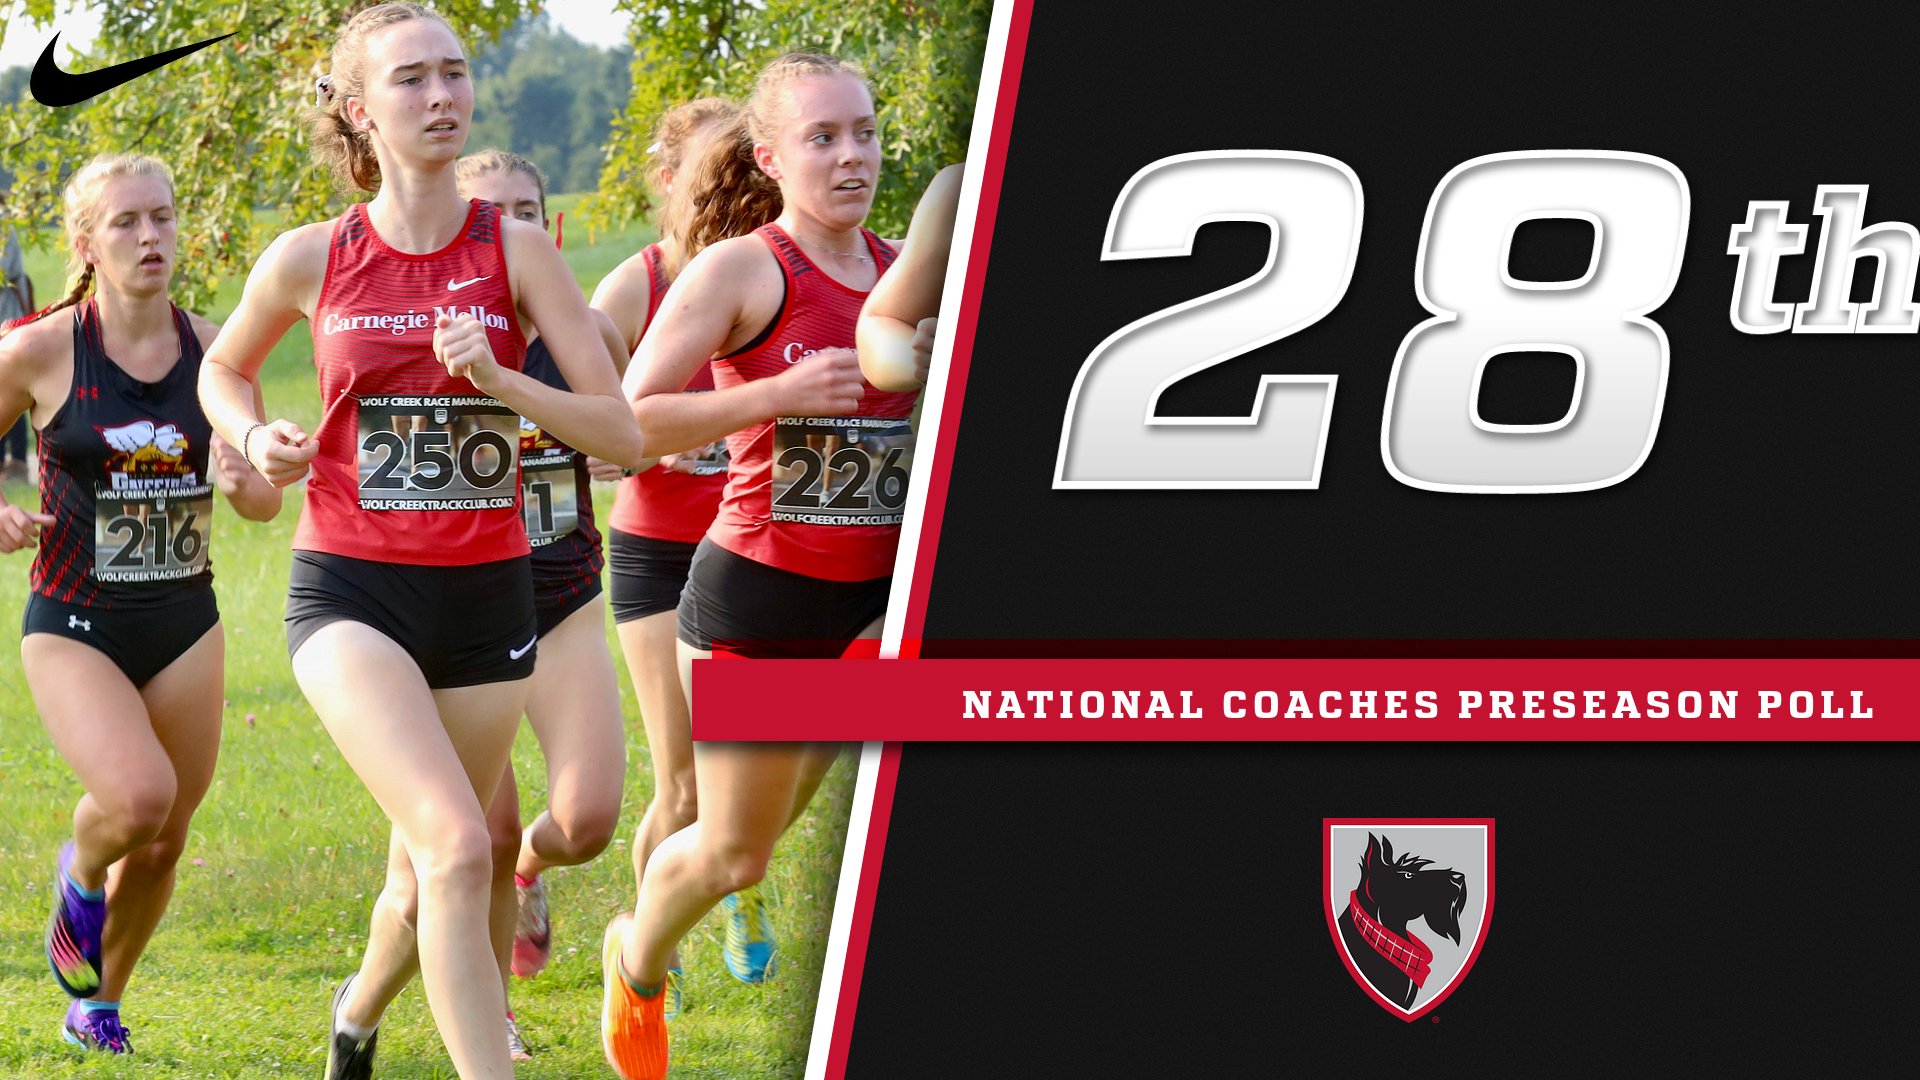 women's cross country runners in action with text reading 28th National Coaches Preseason Poll